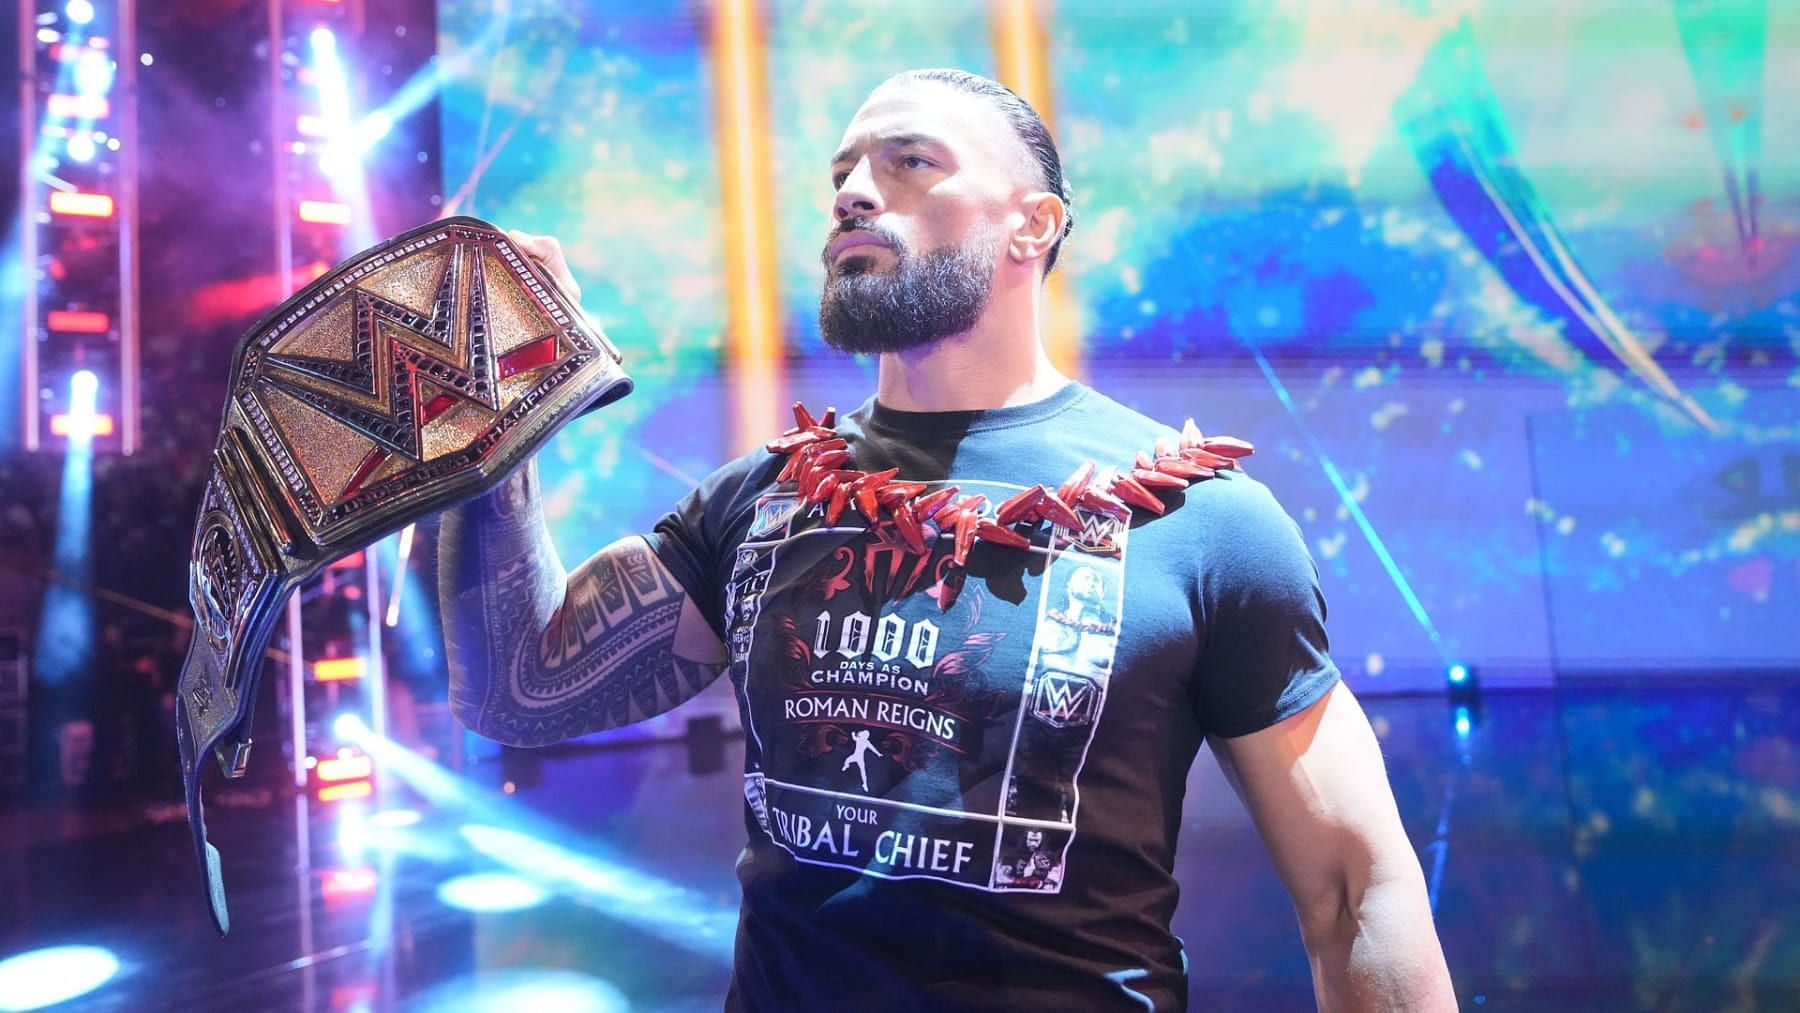 Roman Reigns is the longest reigning WWE Champion of the modern era